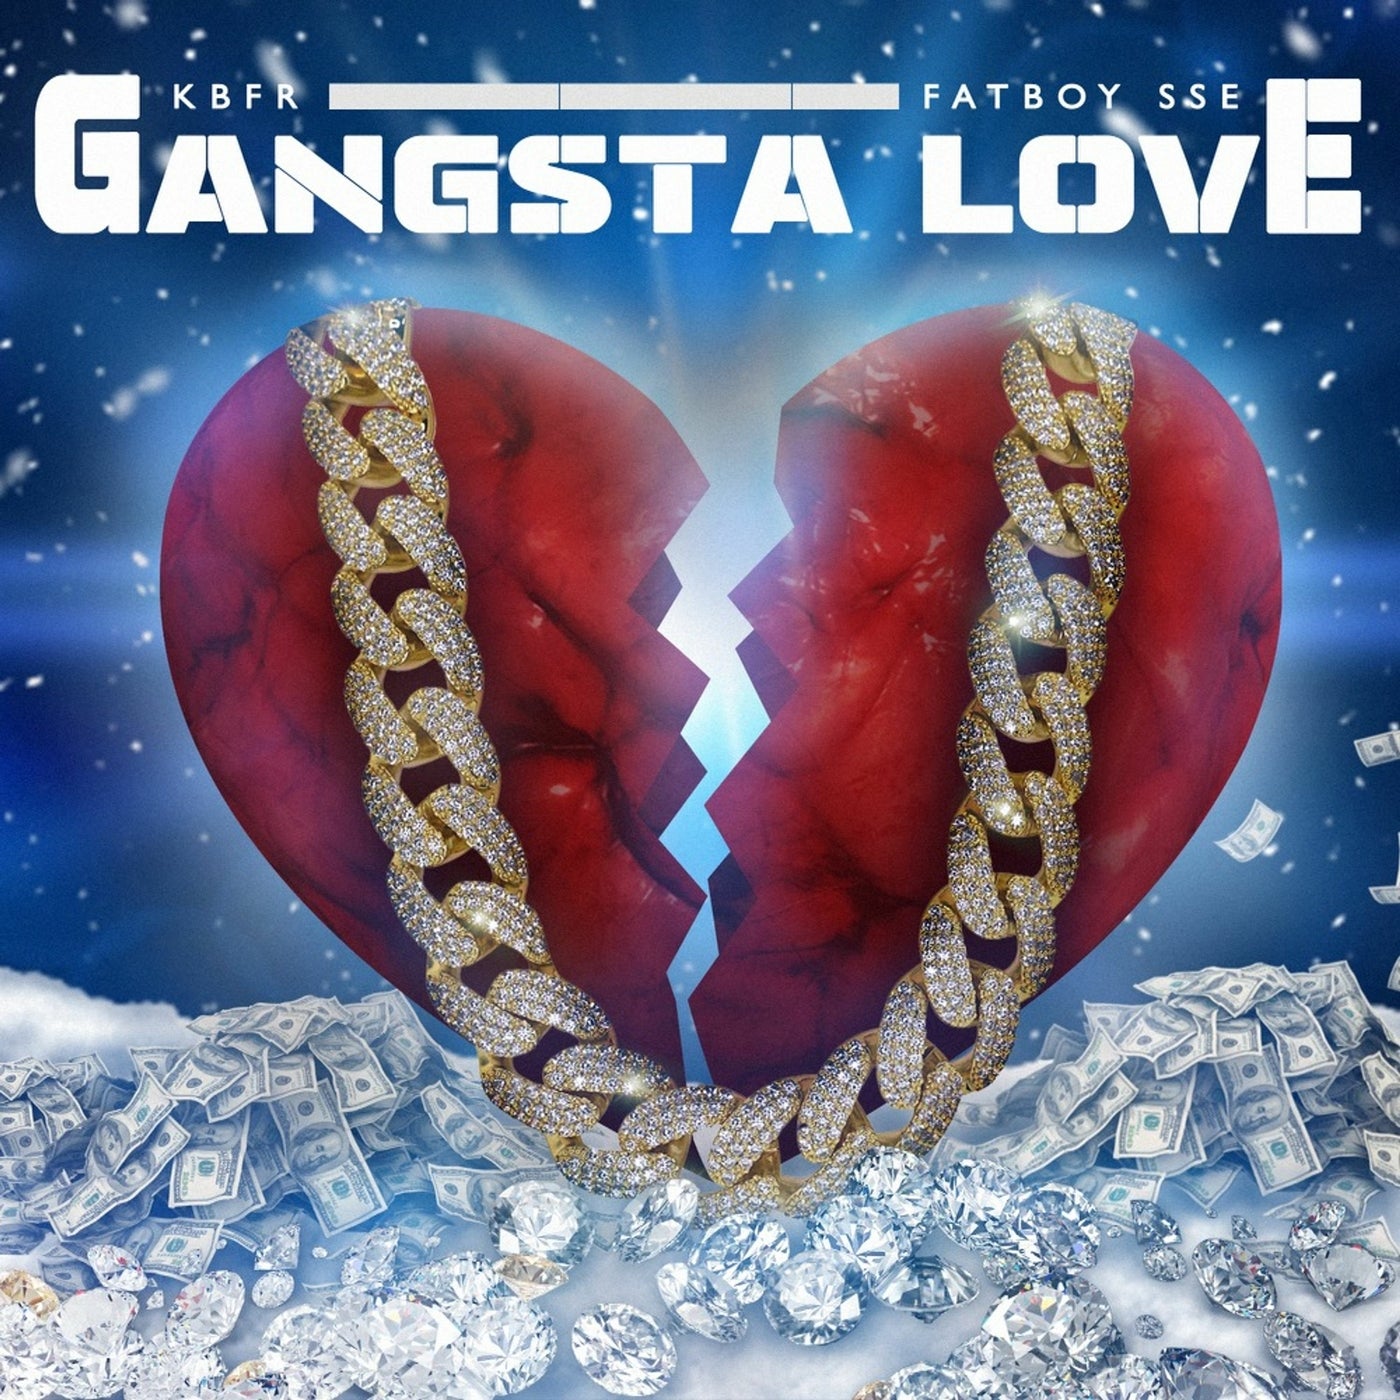 Gangsta Love by Fatboy SSE and KBFR on Beatsource